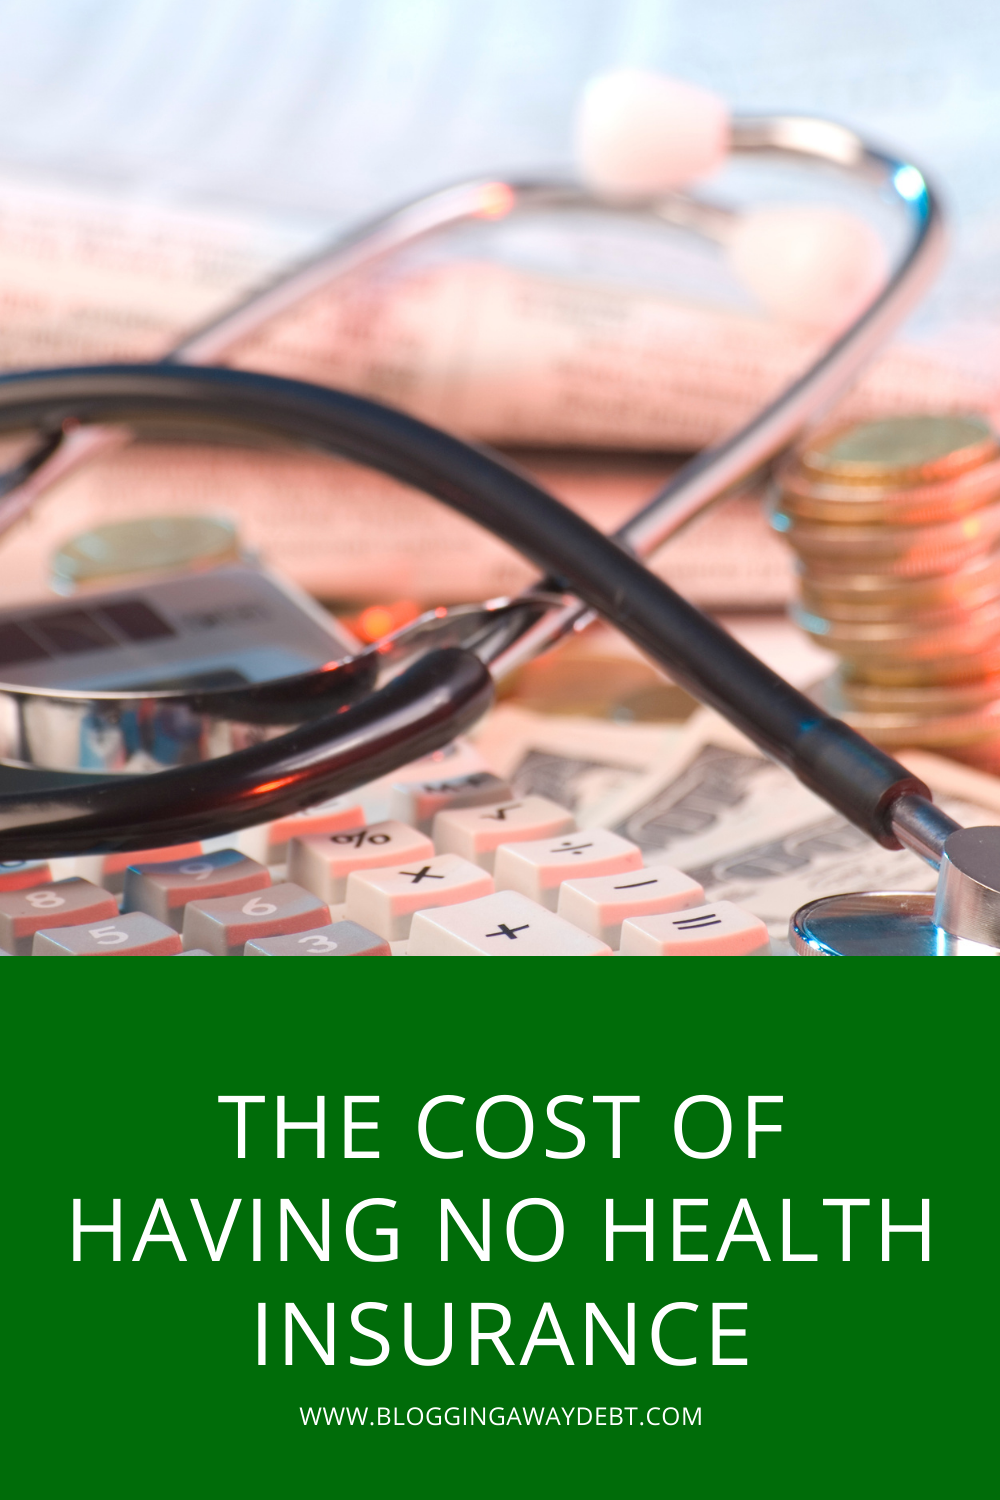 The Cost of Having No Health Insurance